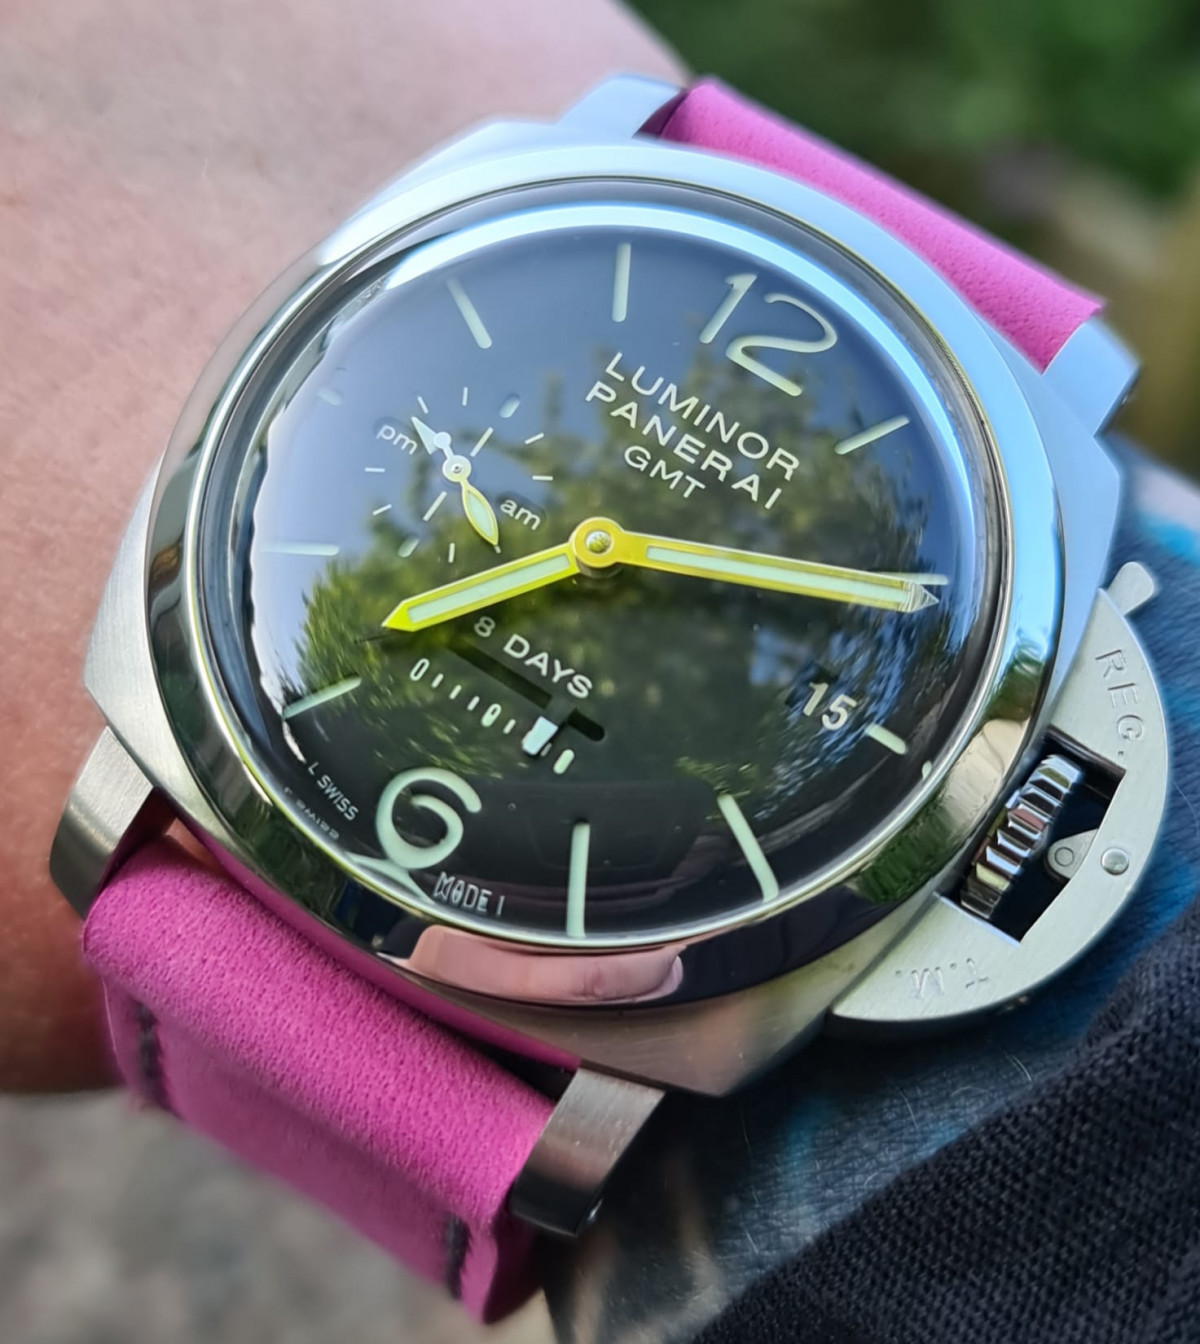 Panerai 233 on Bubble Gum leather with grey stitching. © Celia Cordingly